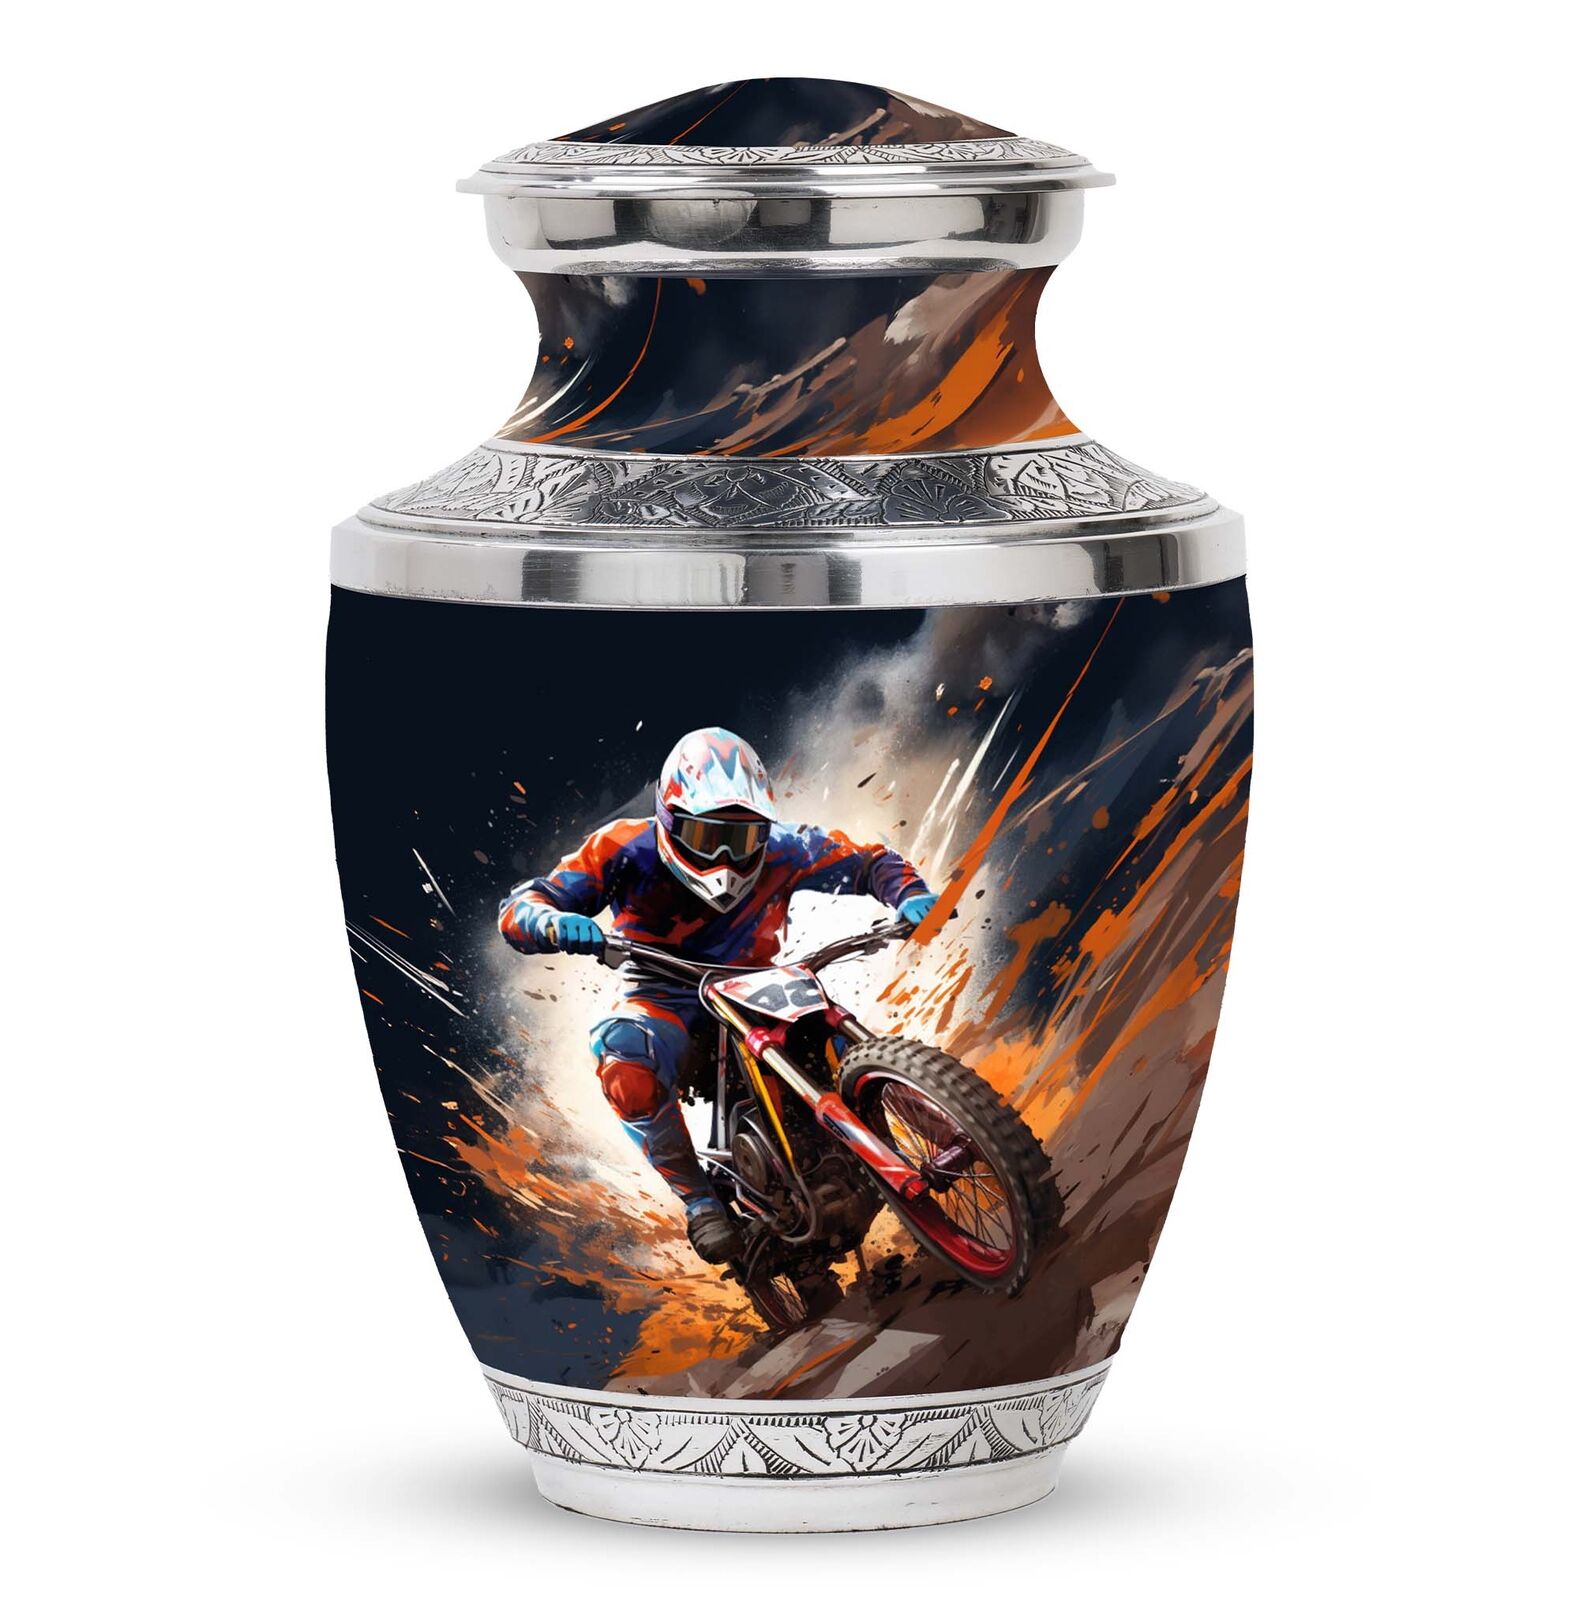 Dirt Bike Charge Large Precious Memories Urns For Ashes 200 cubic inch